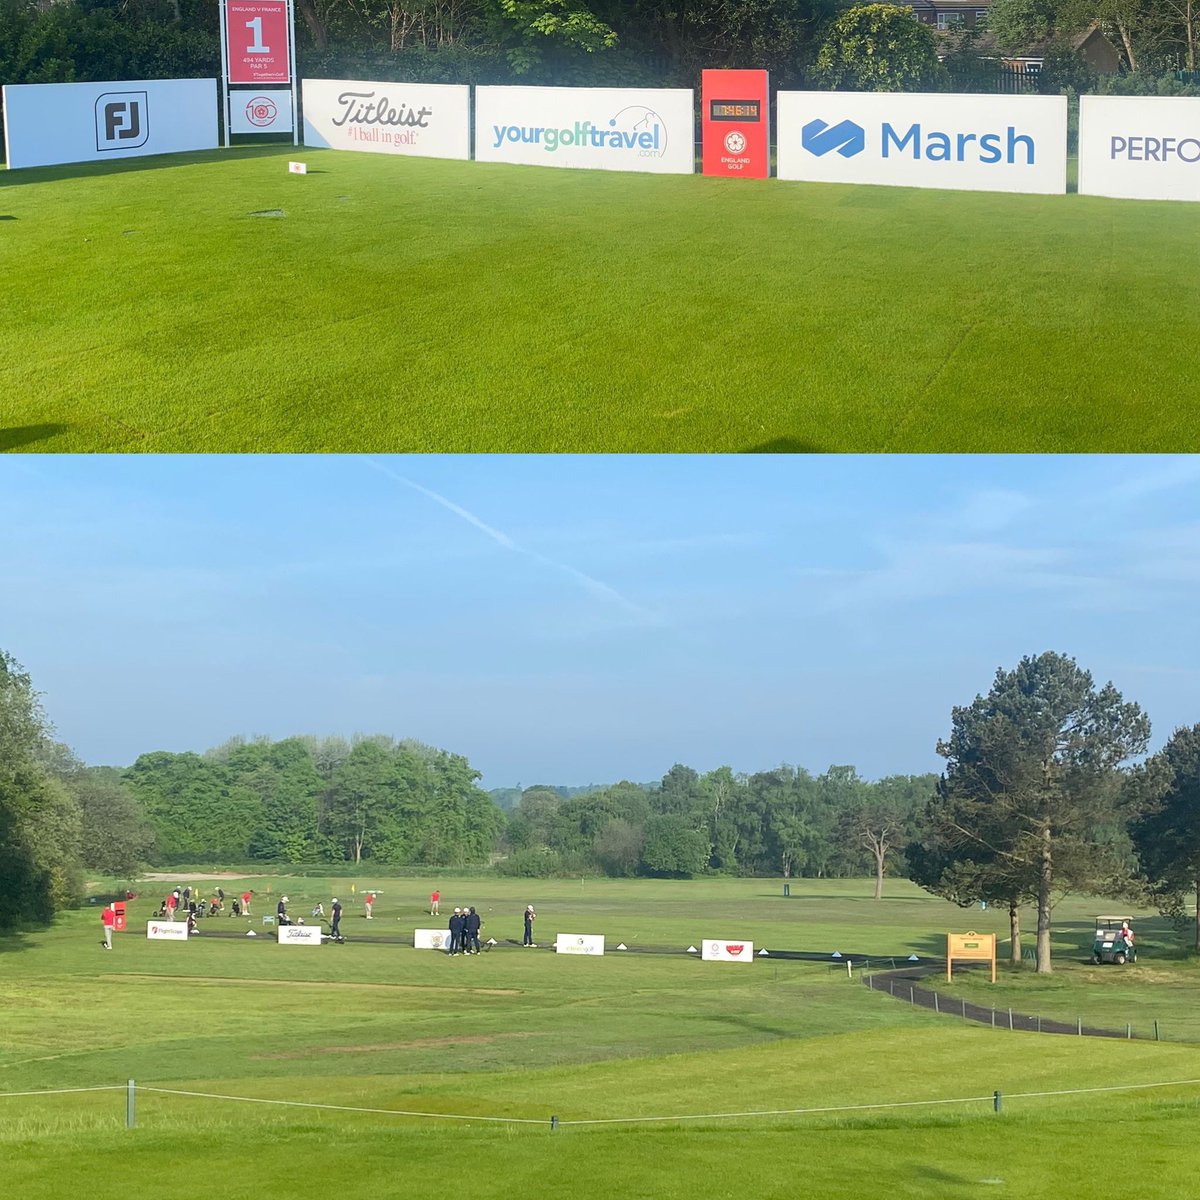 England vs France taking place this weekend at Moortown - spectators very welcome Incredible effort by @MoortownGreens to have the course looking this good after the past few months - good luck to both teams